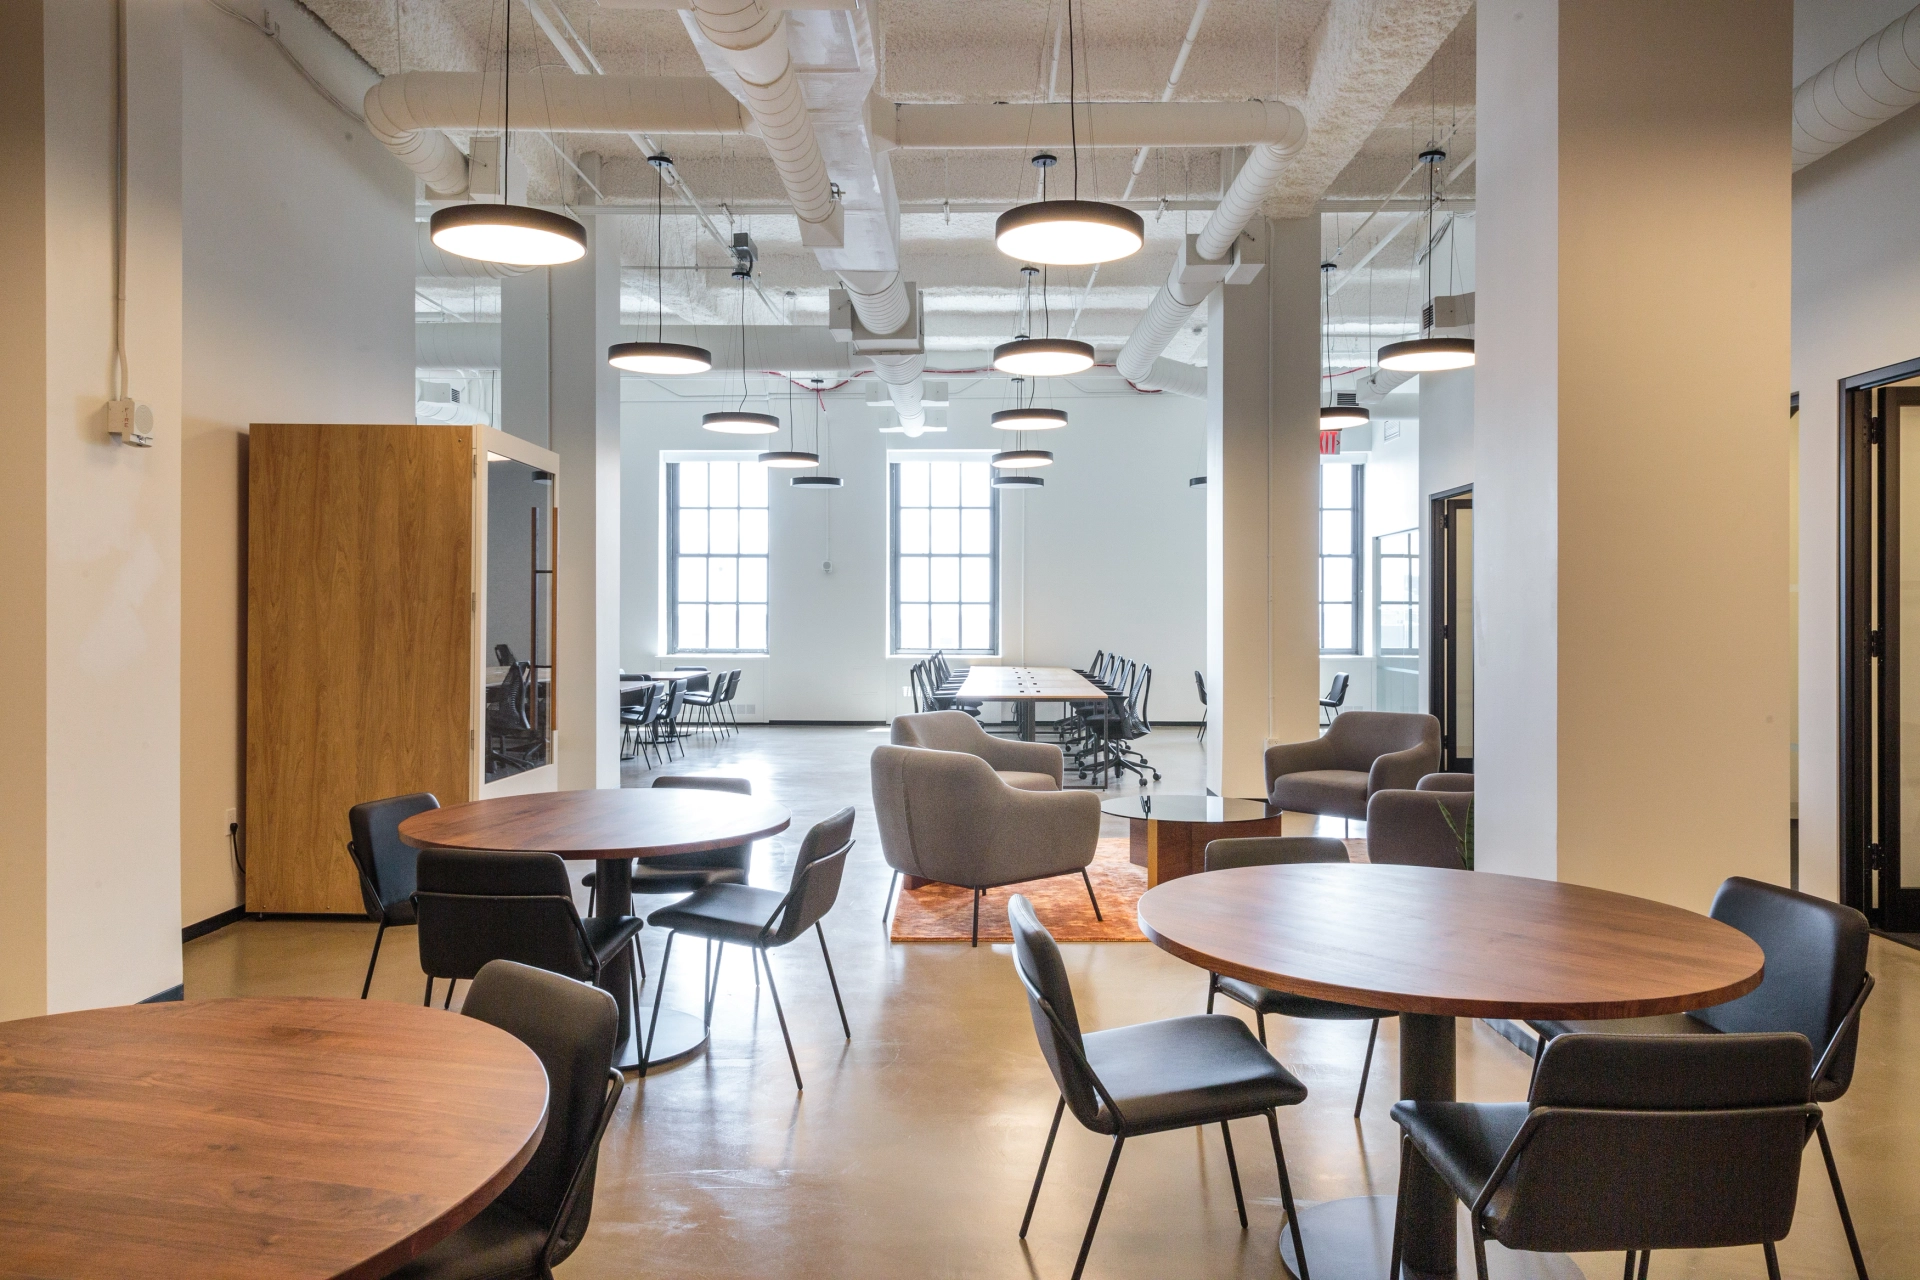 A coworking space equipped with tables and chairs for an open office environment.